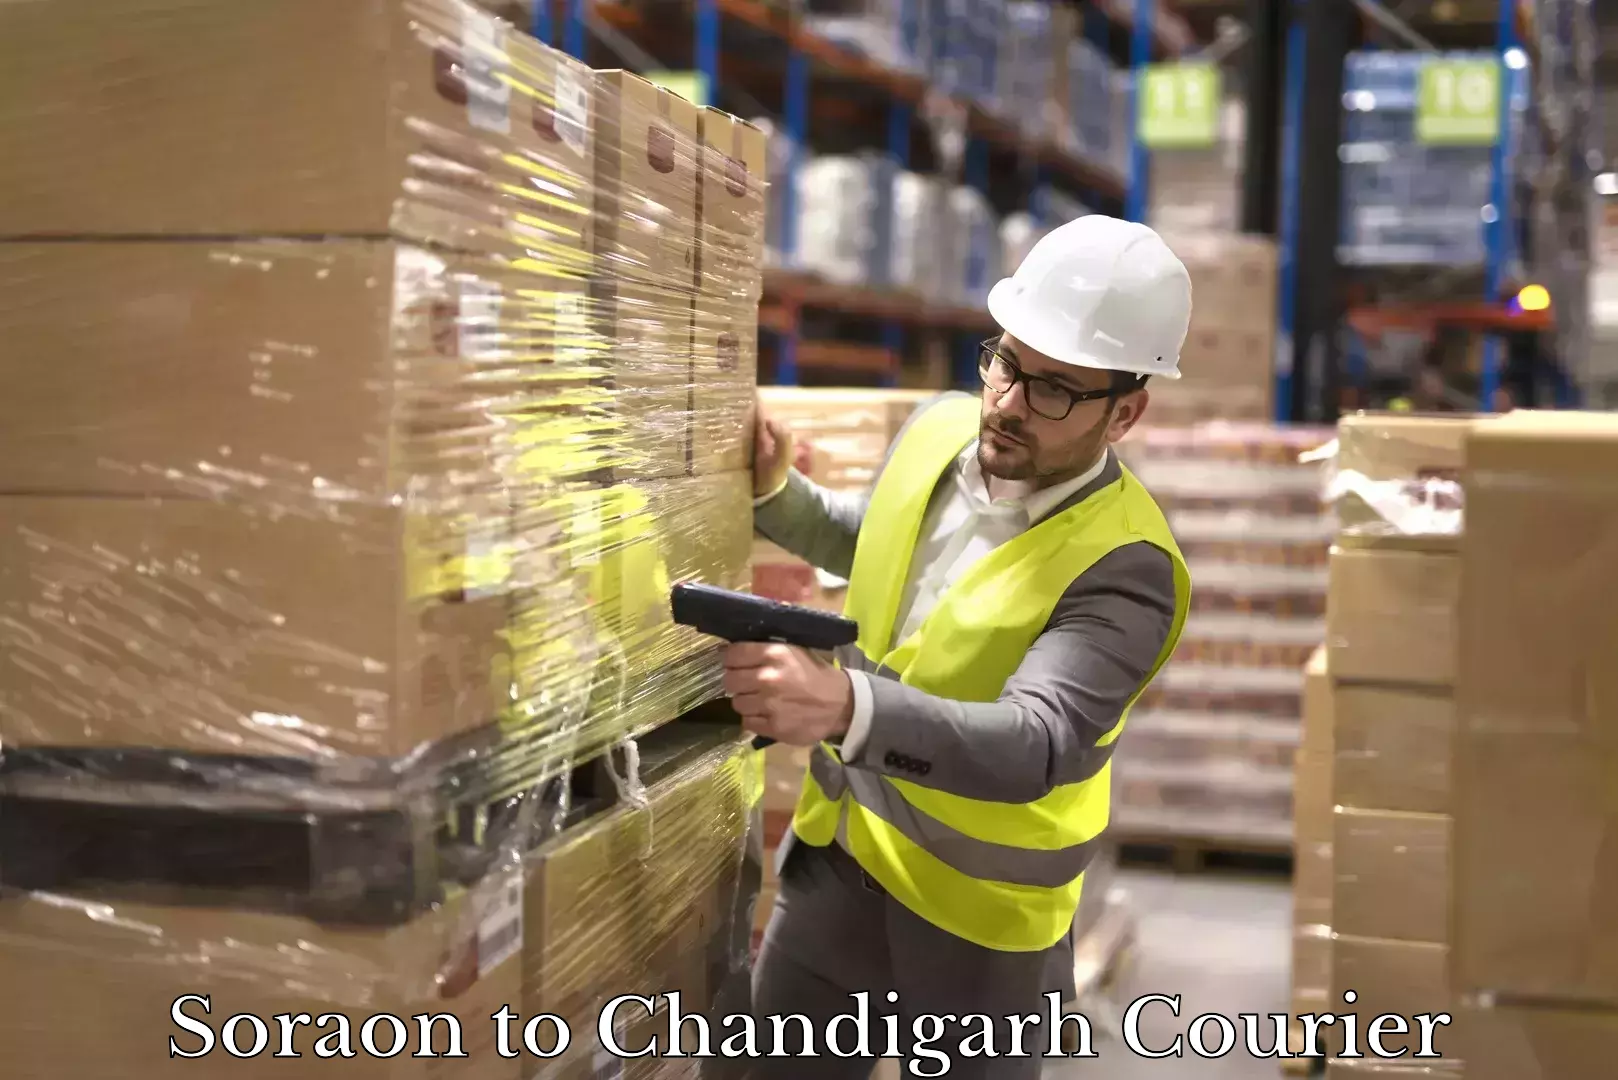 Special handling courier Soraon to Chandigarh